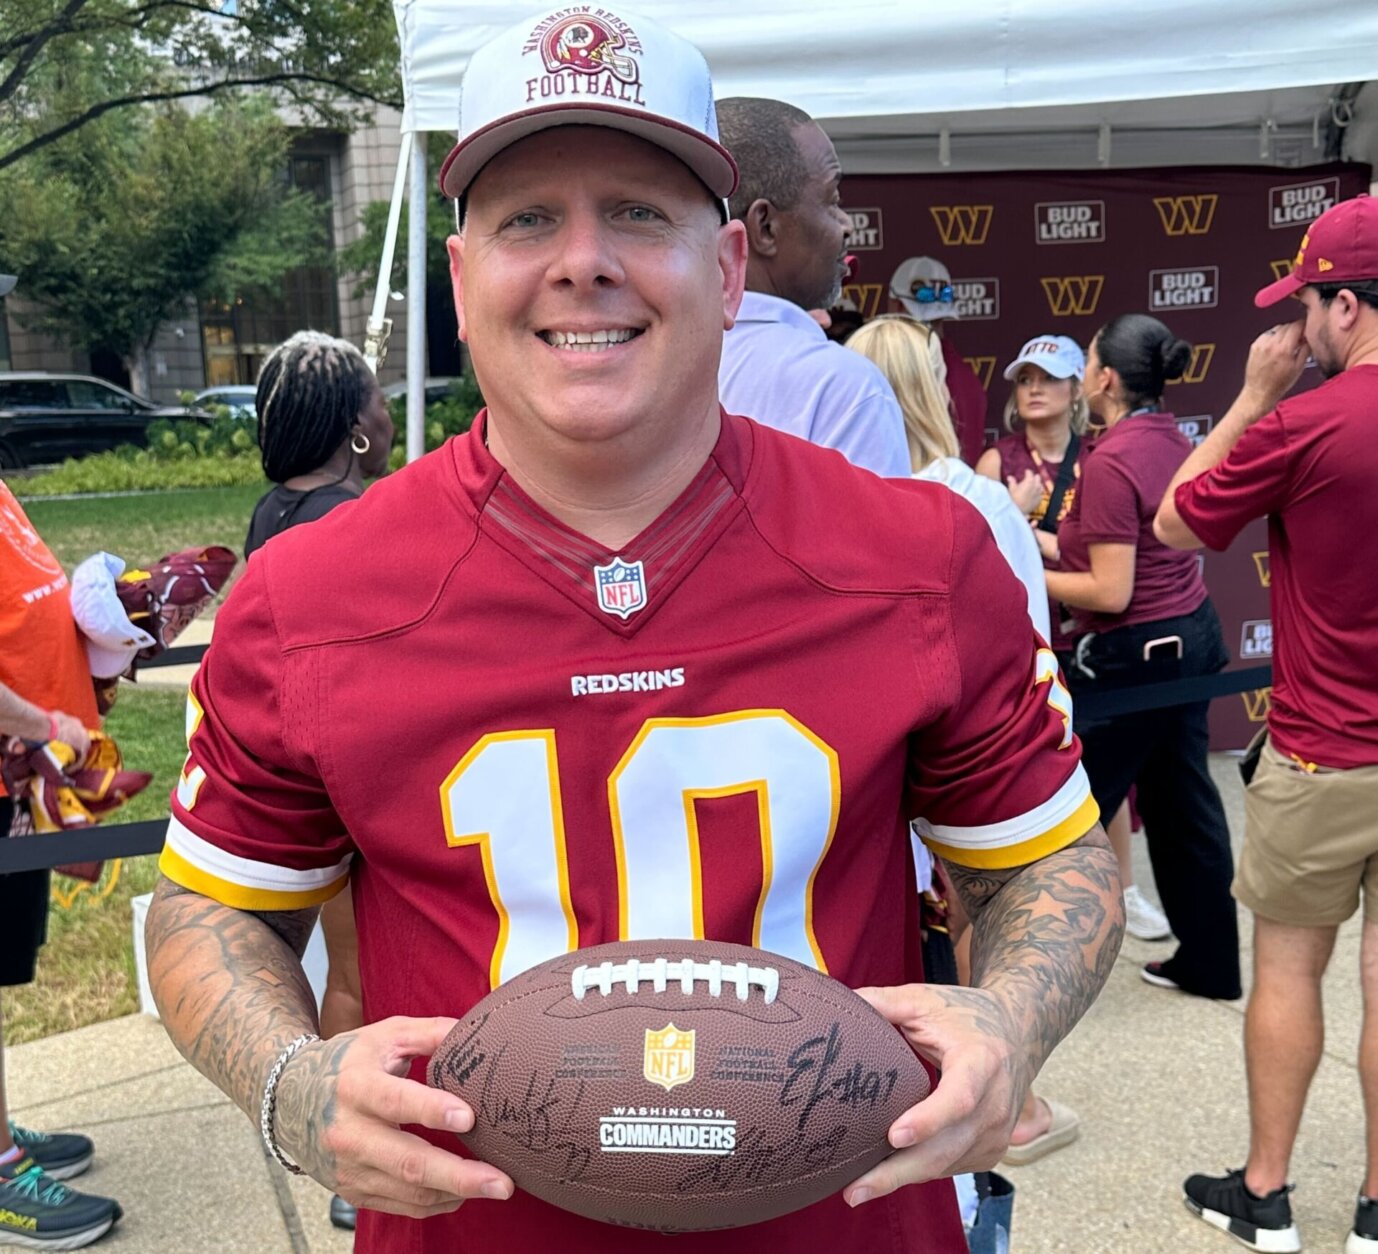 <p>Wolf and his family flew all the way in from North Dakota and are staying for the game on Sunday. He said the Commanders have been his team since he saw John Riggins running on TV decades ago.</p>
